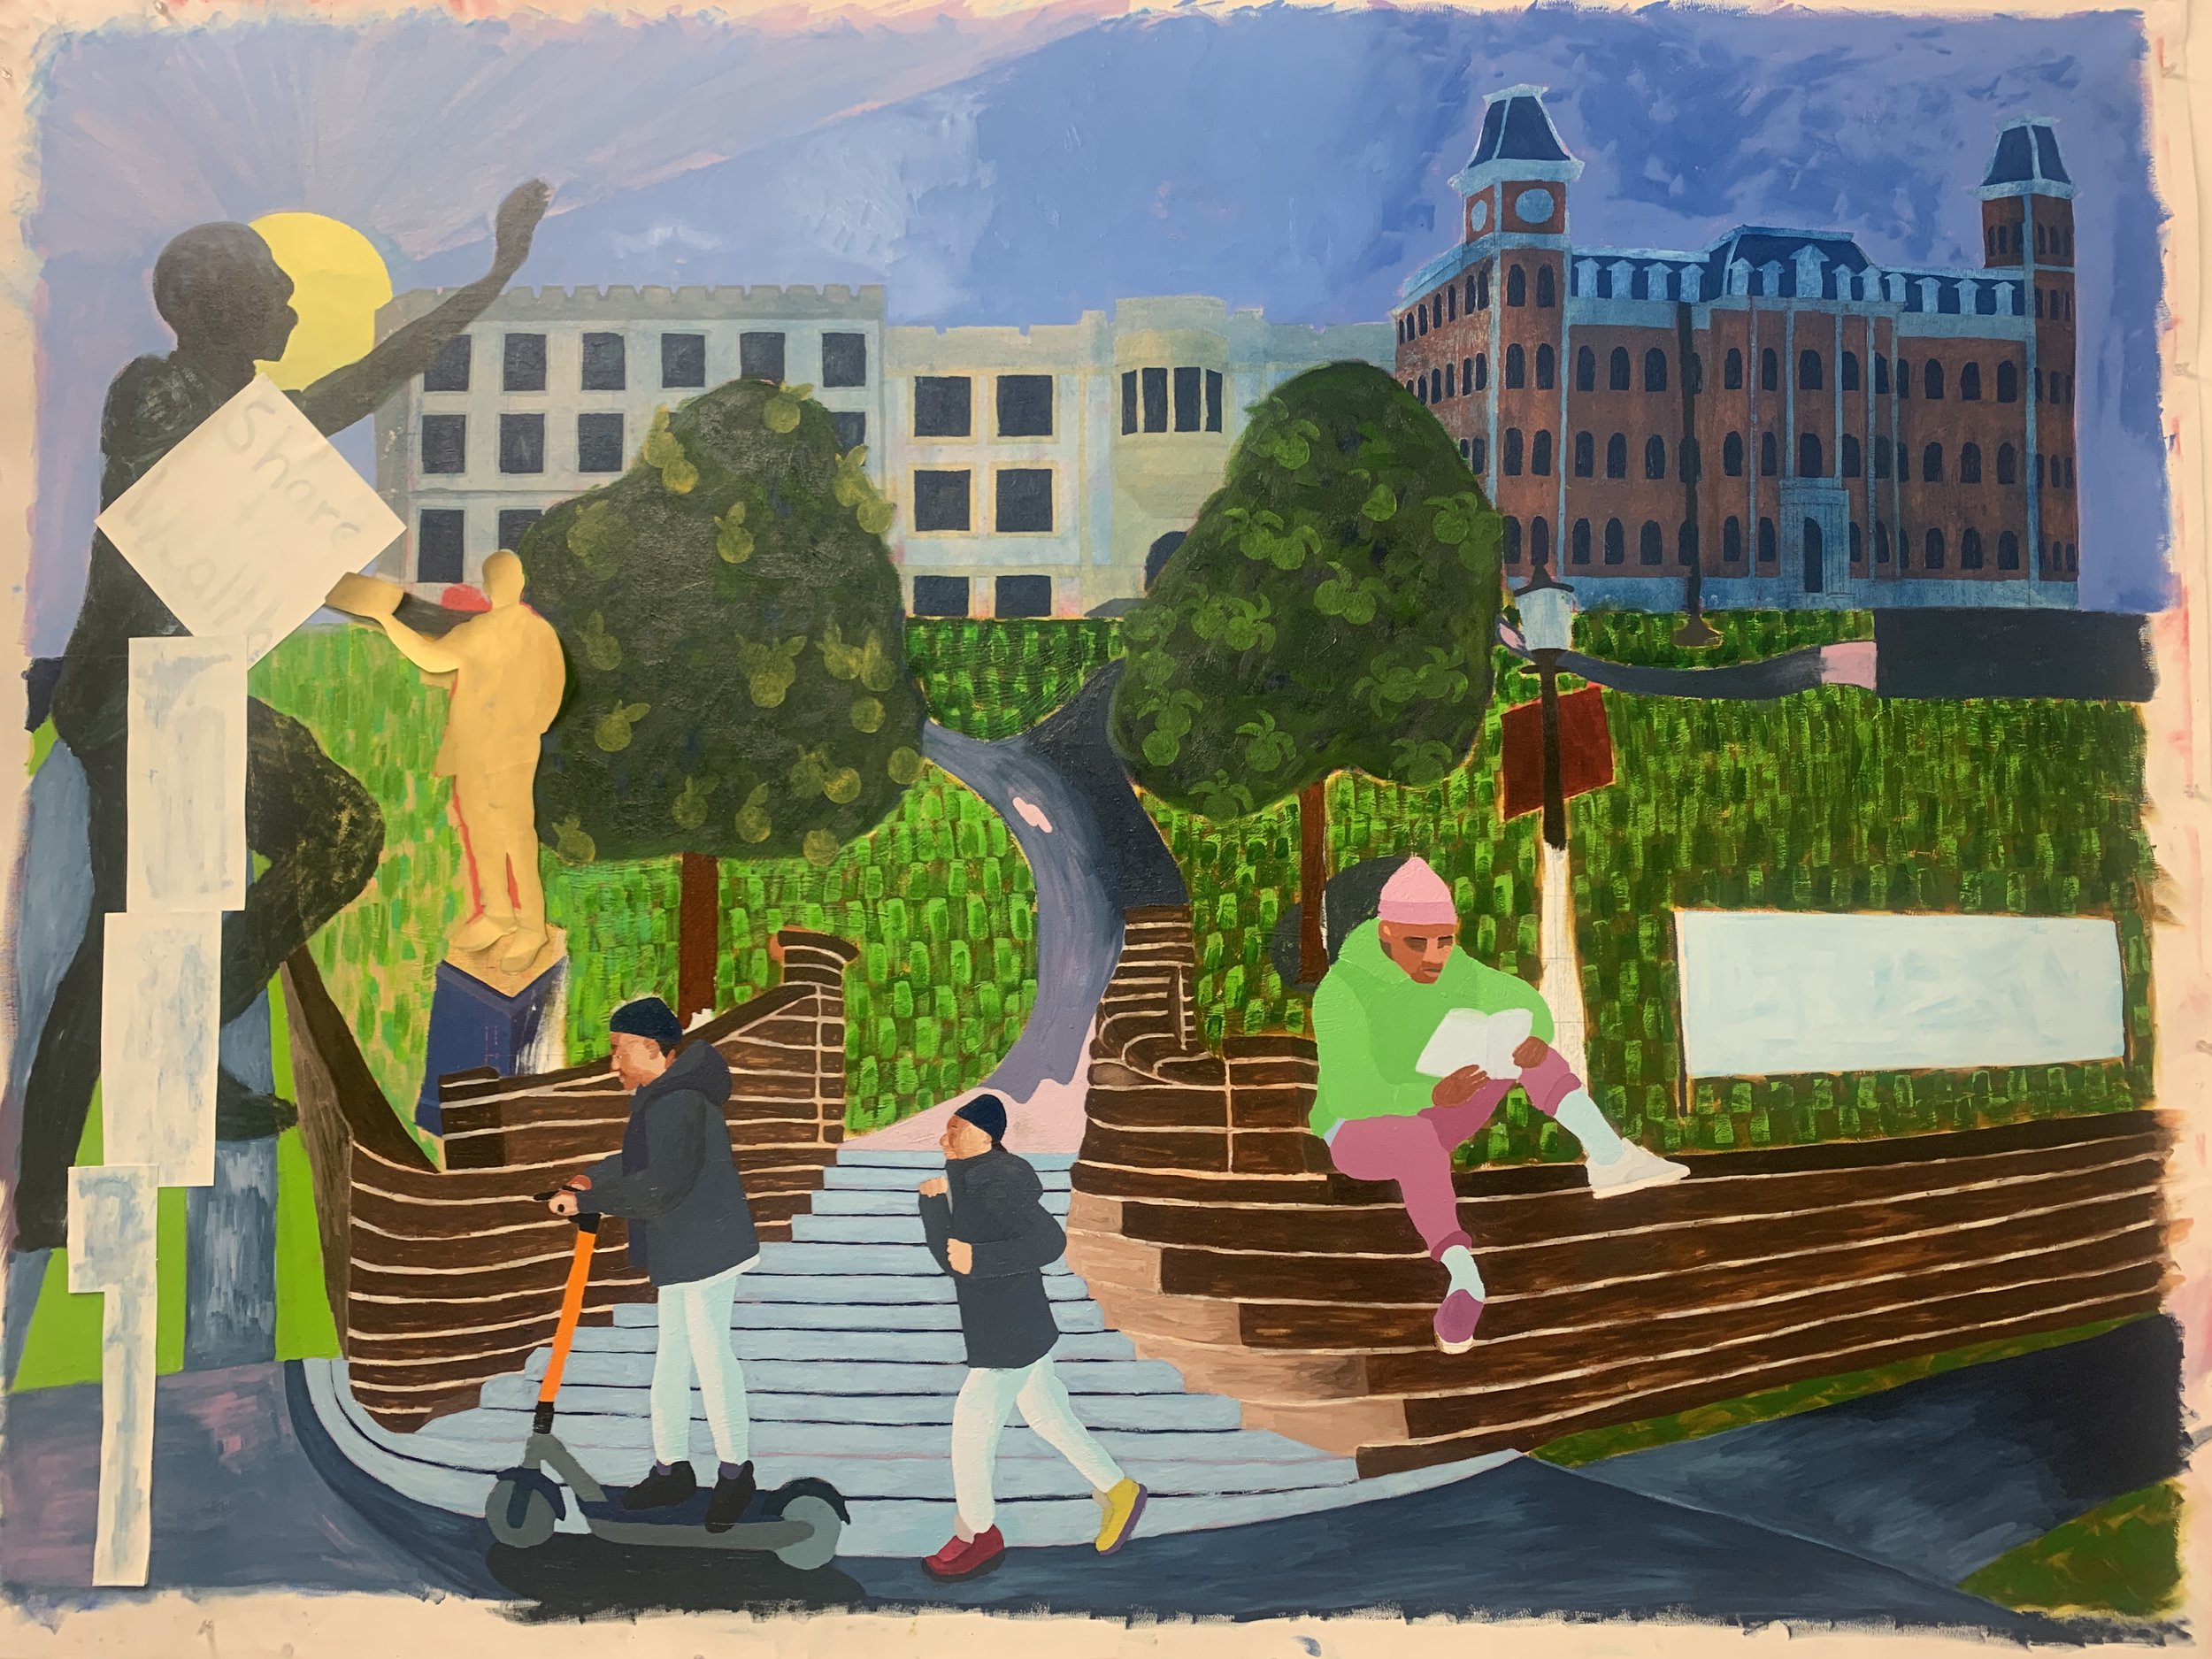    Our Campus  , 5’ x 6’, oil on canvas 